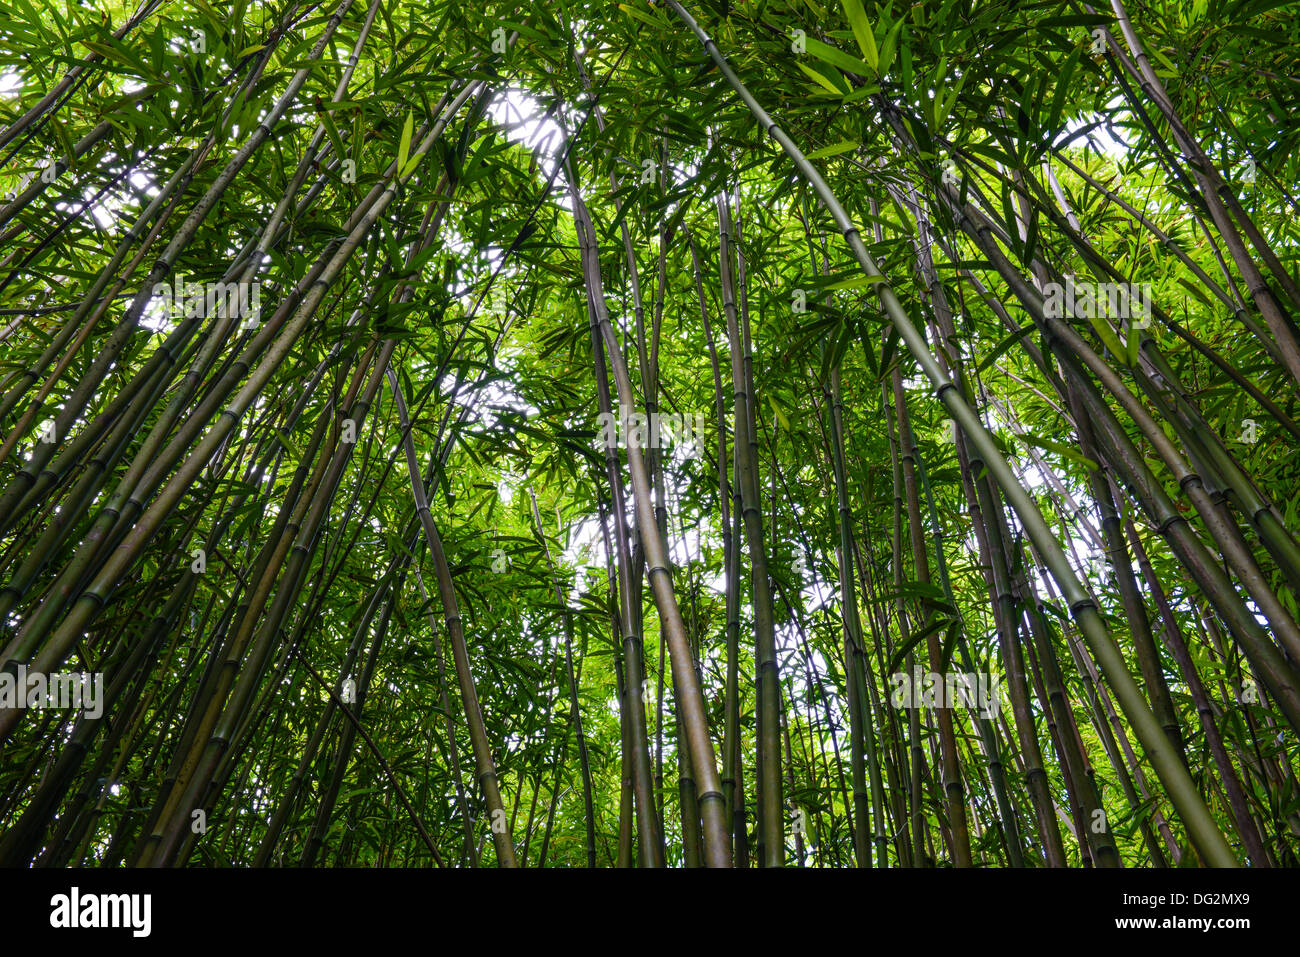 Bamboo Forest in Maui Hawaii Stock Photo